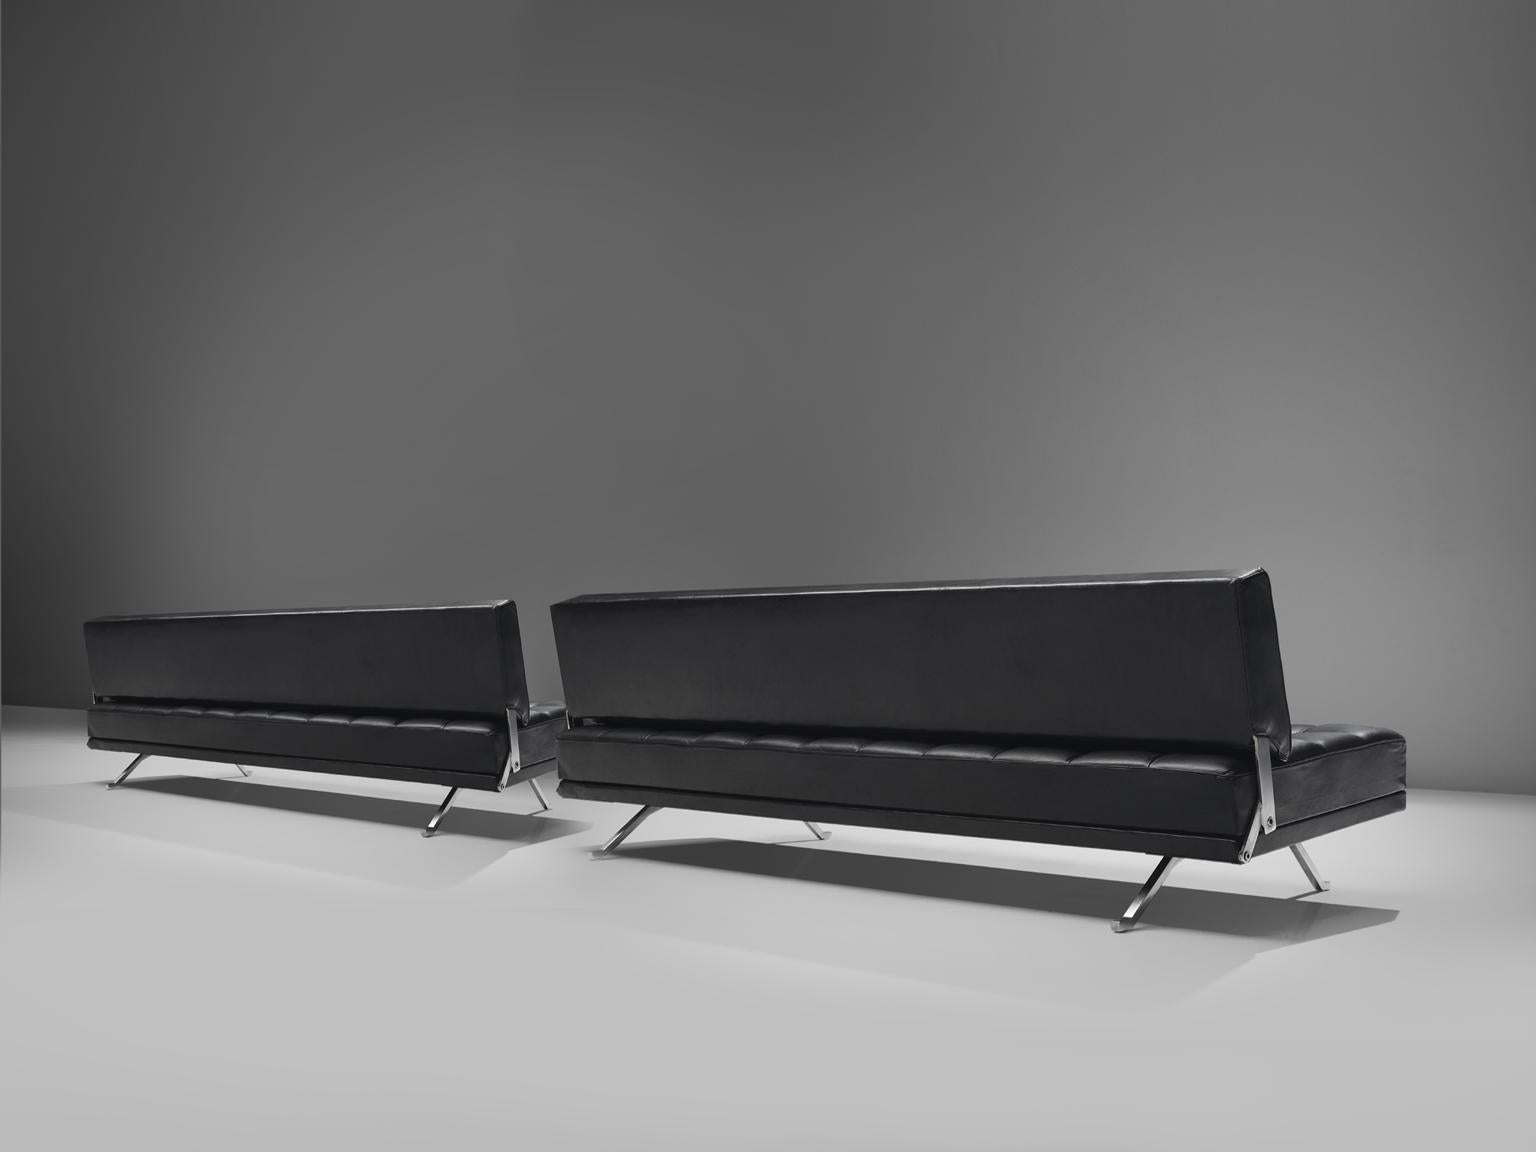 Johannes Spalt for Wittmann, 'Constanze' daybed or sofa, black leather, brushed steel, Austria, 1960s. 

This Austrian daybed named is typical for Mid-Century Modern design from Austria. The tufted leather seat and back is constructed with the slick